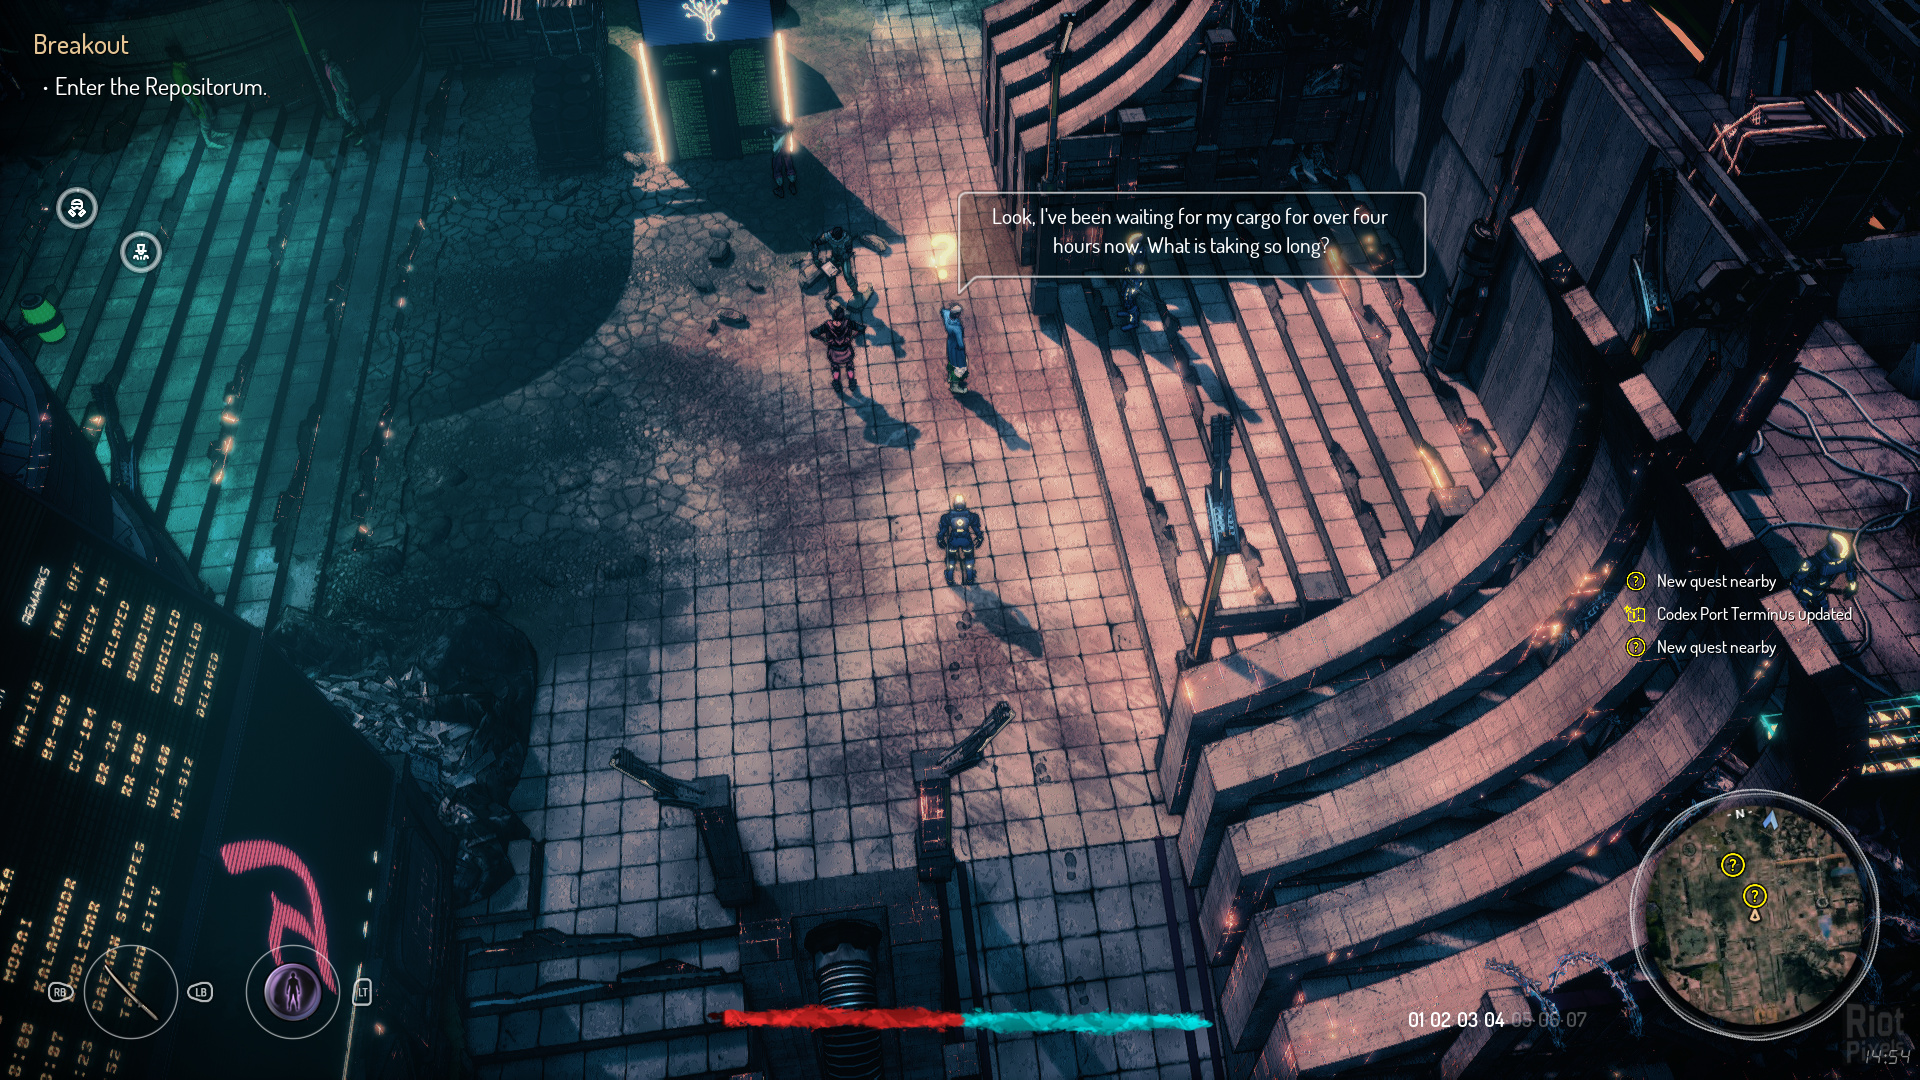 Análise: Seven: The Days Long Gone (PC) une RPG, stealth, parkour e  gameplay confuso - GameBlast